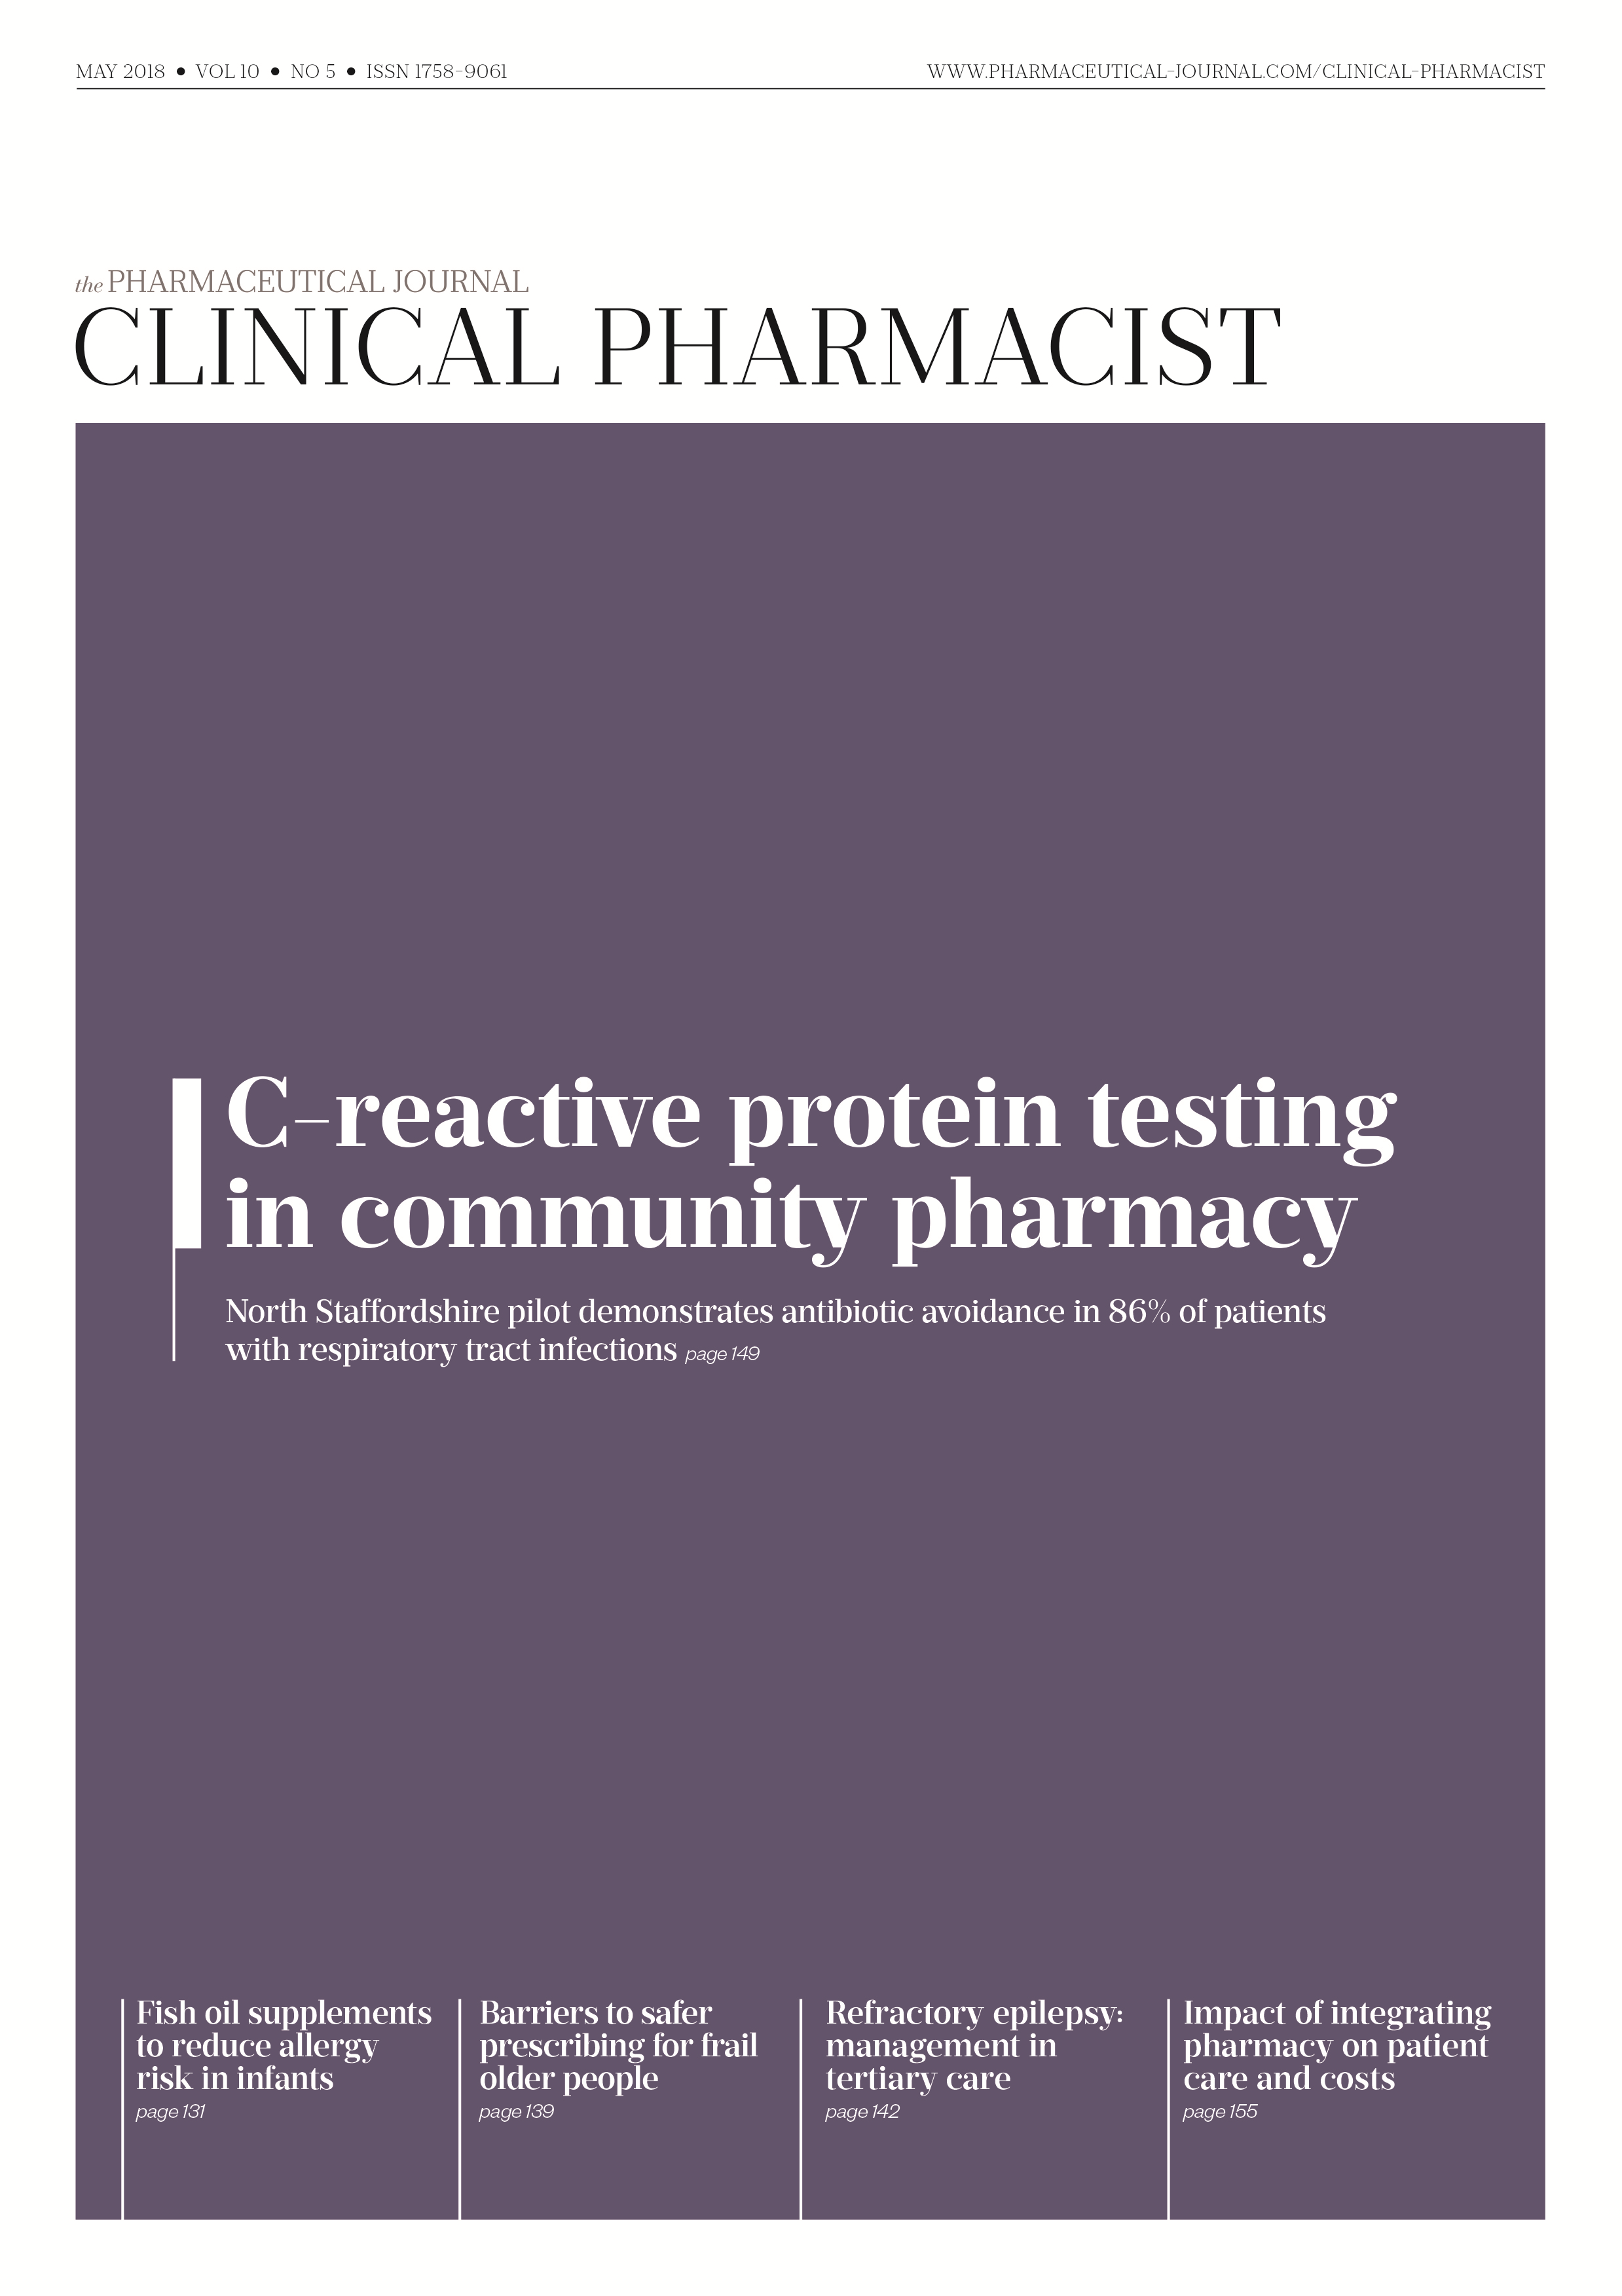 Publication issue cover for CP, May 2018, Vol 10, No 5